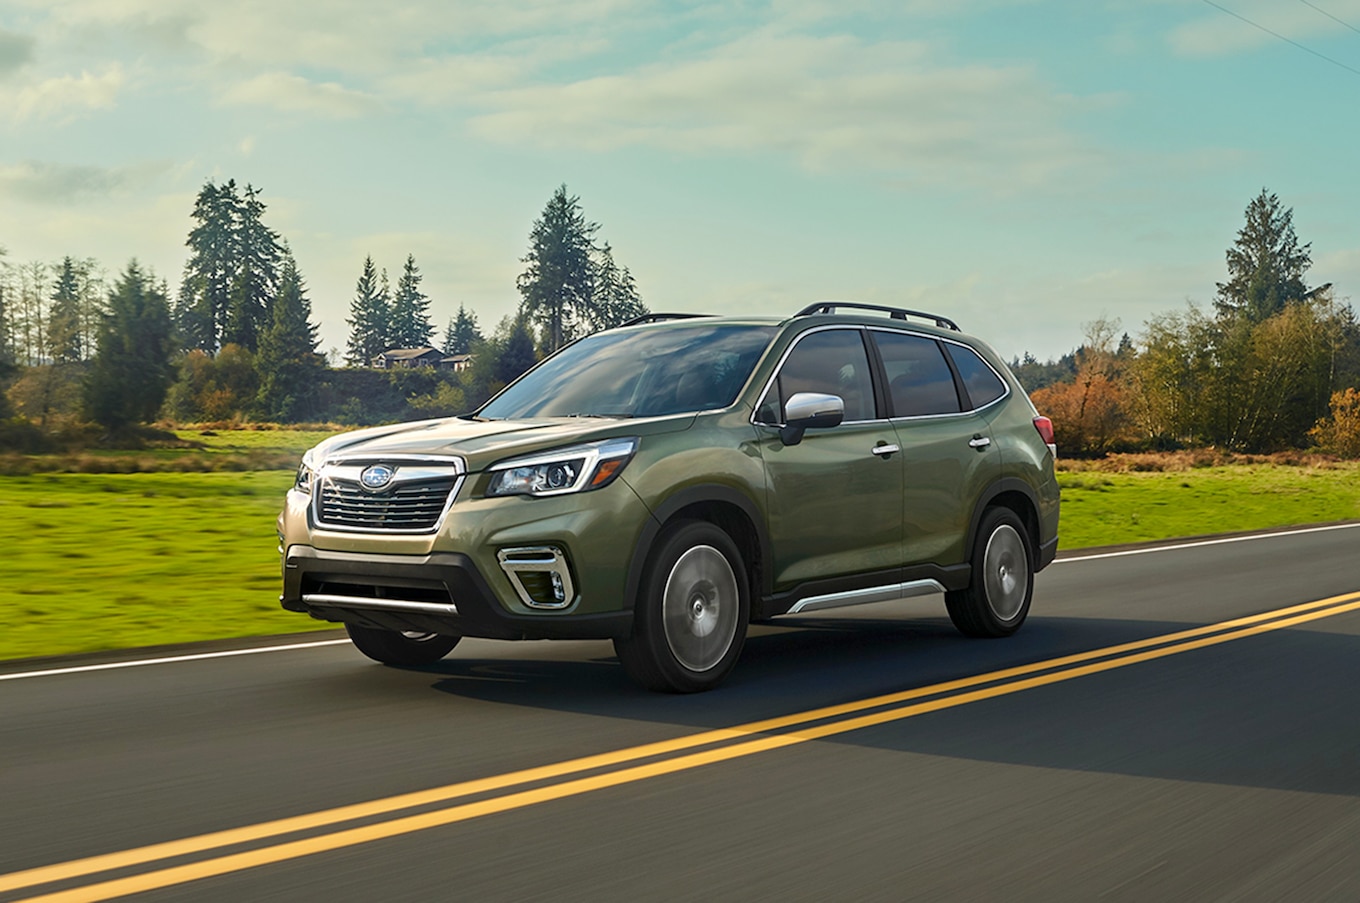 2019 Subaru Forester front three quarter in motion 02 1